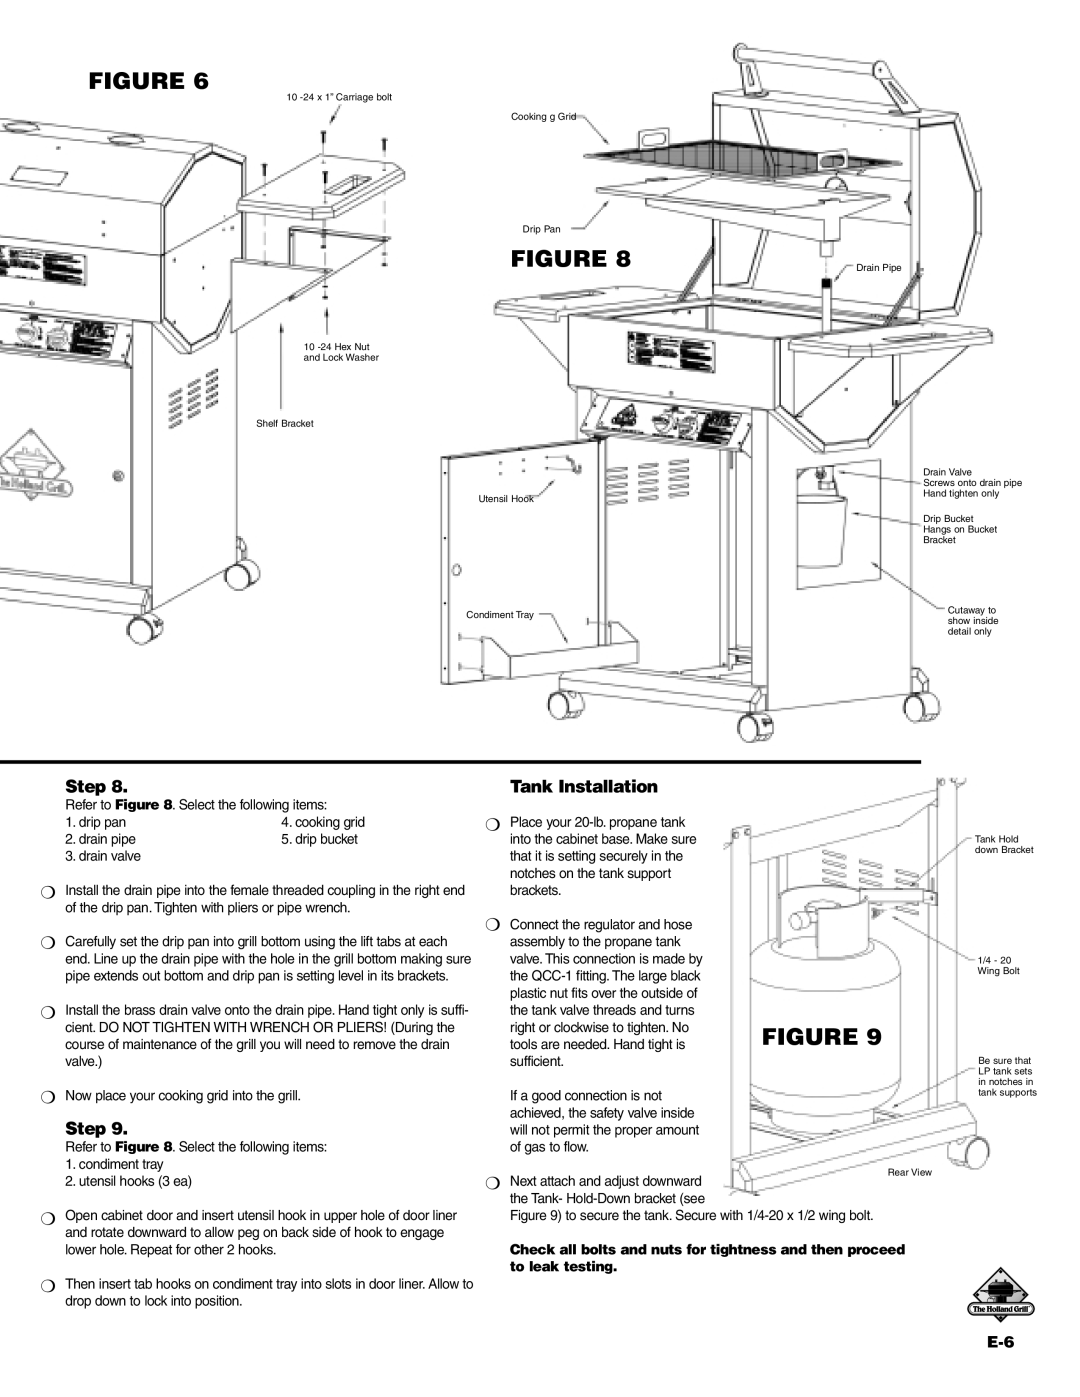 Holland BH421-AG4 manual Refer to . Select the following items Drip pan, Drain pipe, That it is setting securely 